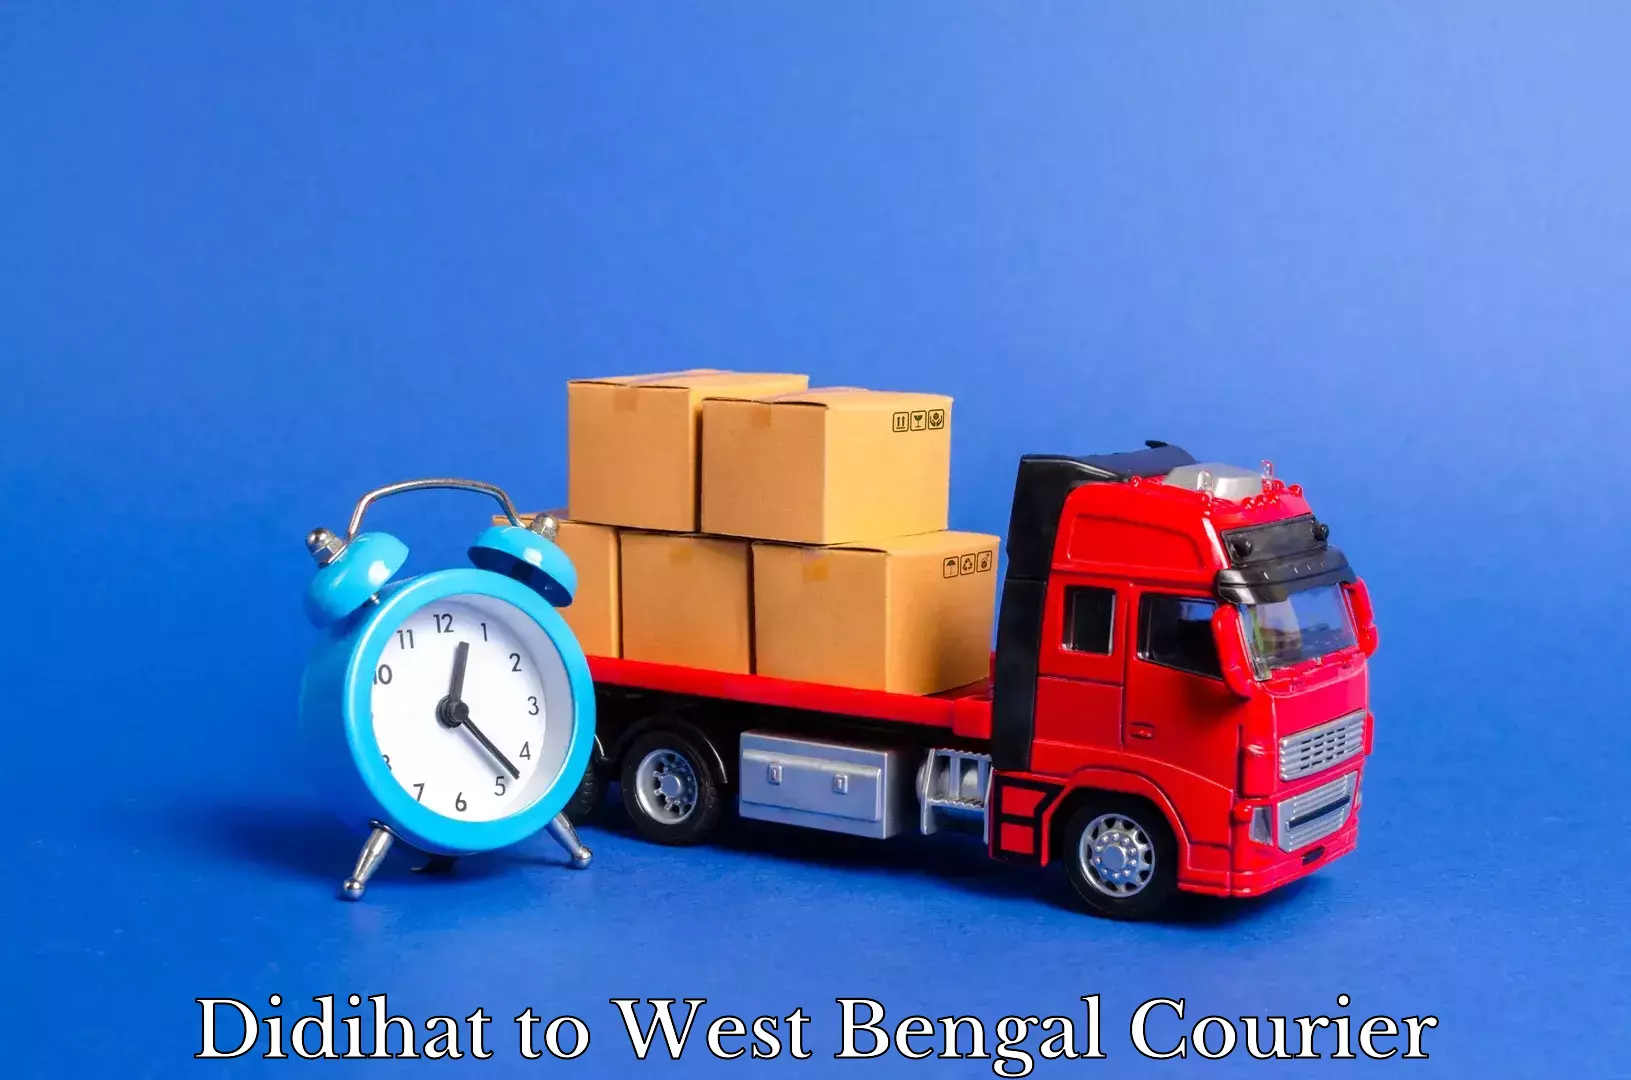 Furniture relocation experts Didihat to West Bengal